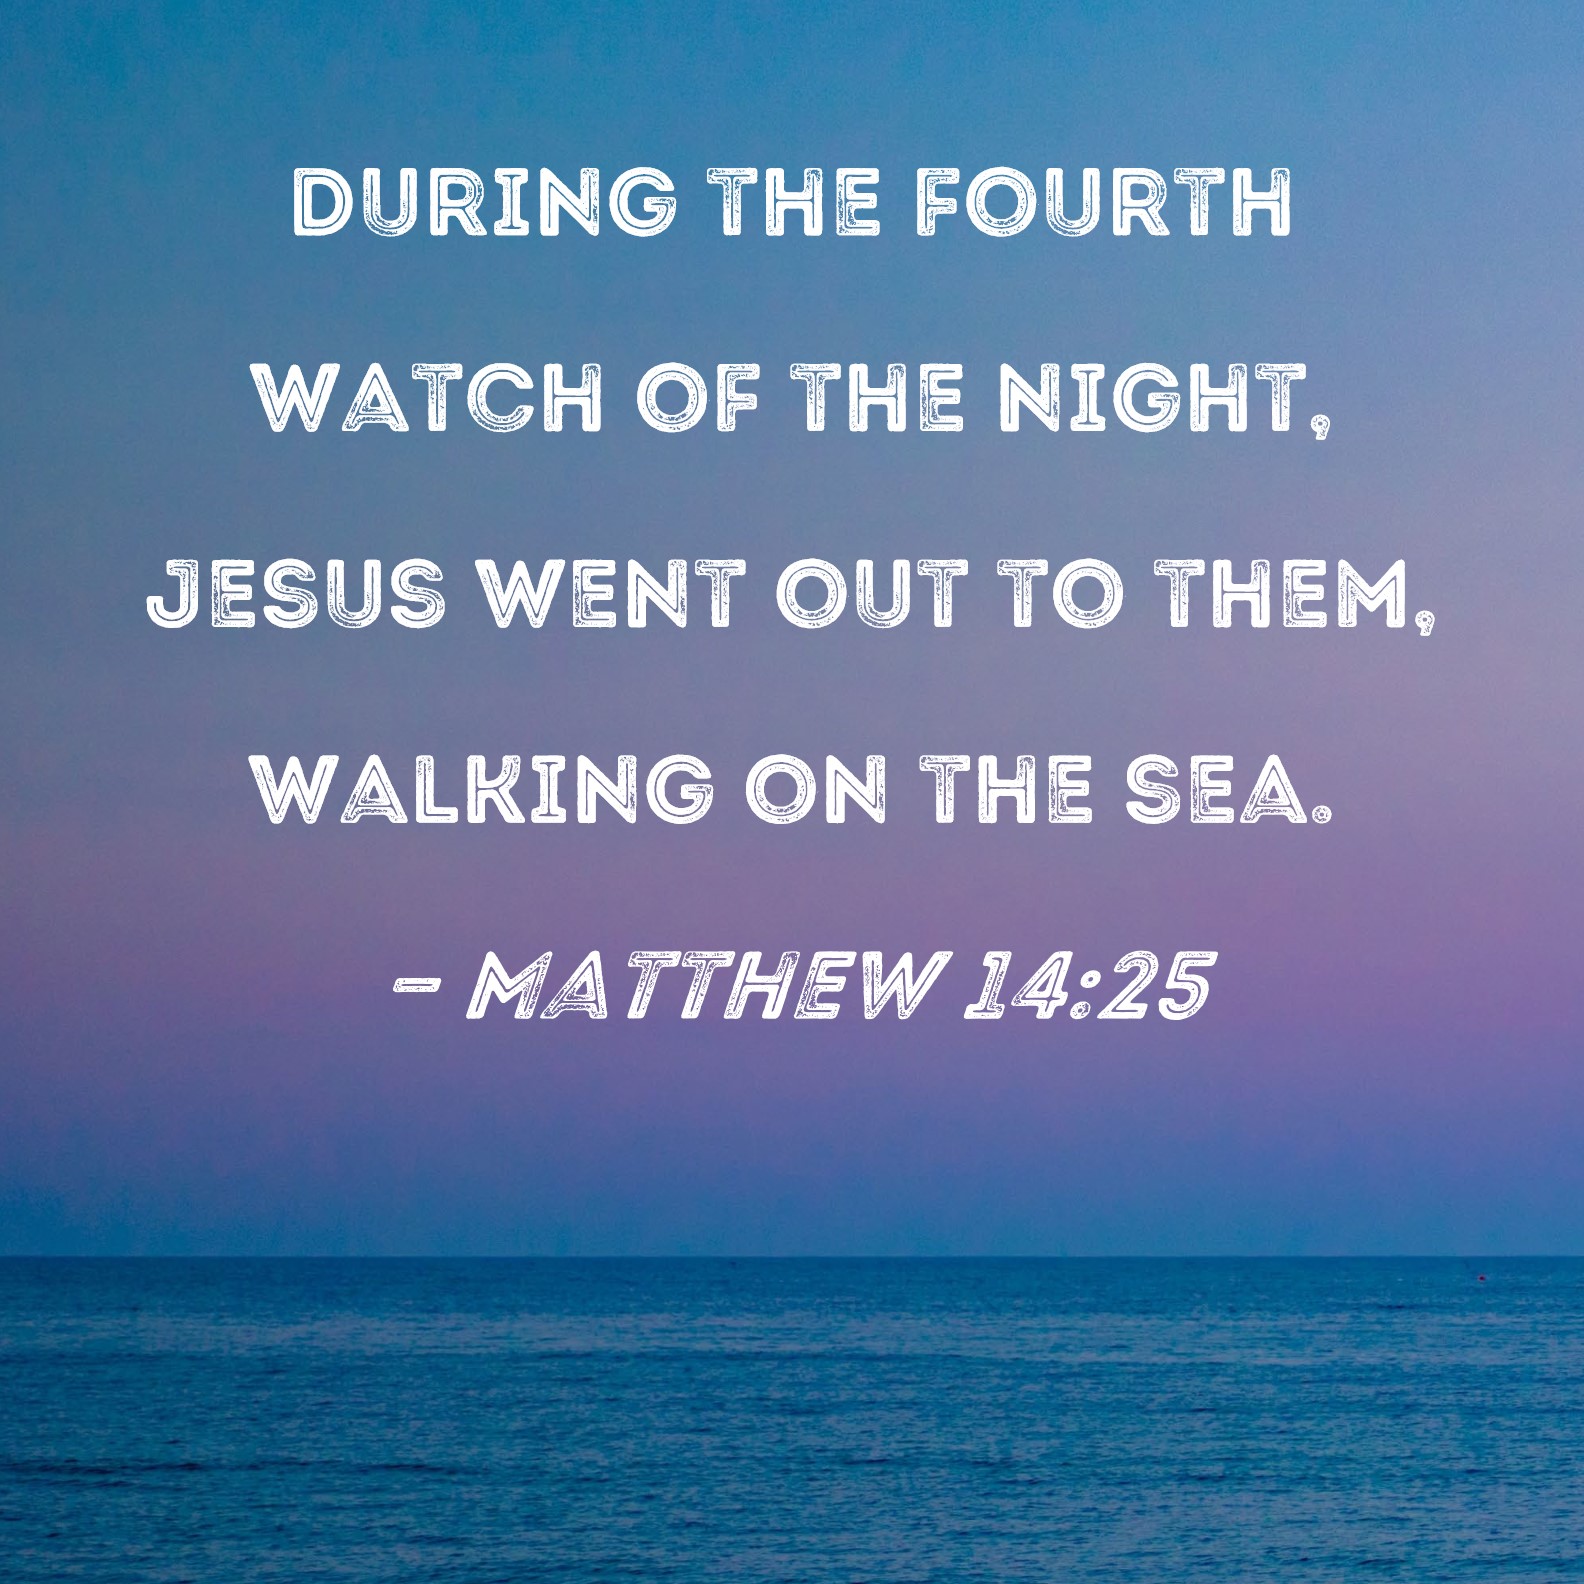 Matthew 14:25 During the fourth watch of the night, Jesus went out to